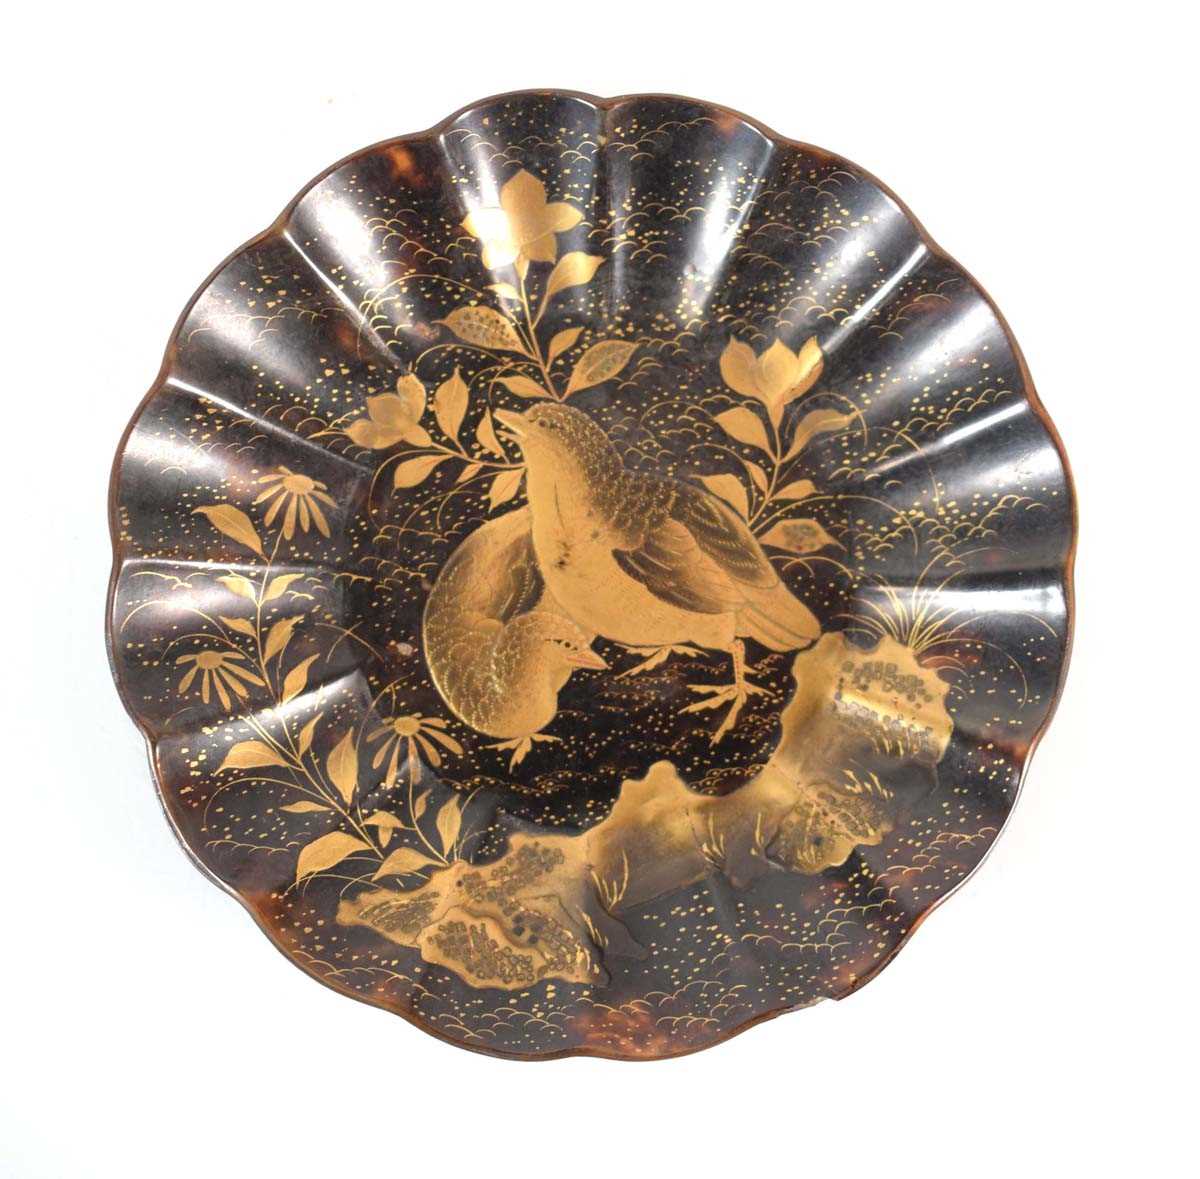 A Japanese tortoiseshell and gilt lacquered dish of flowerhead form, centrally decorated with a pair